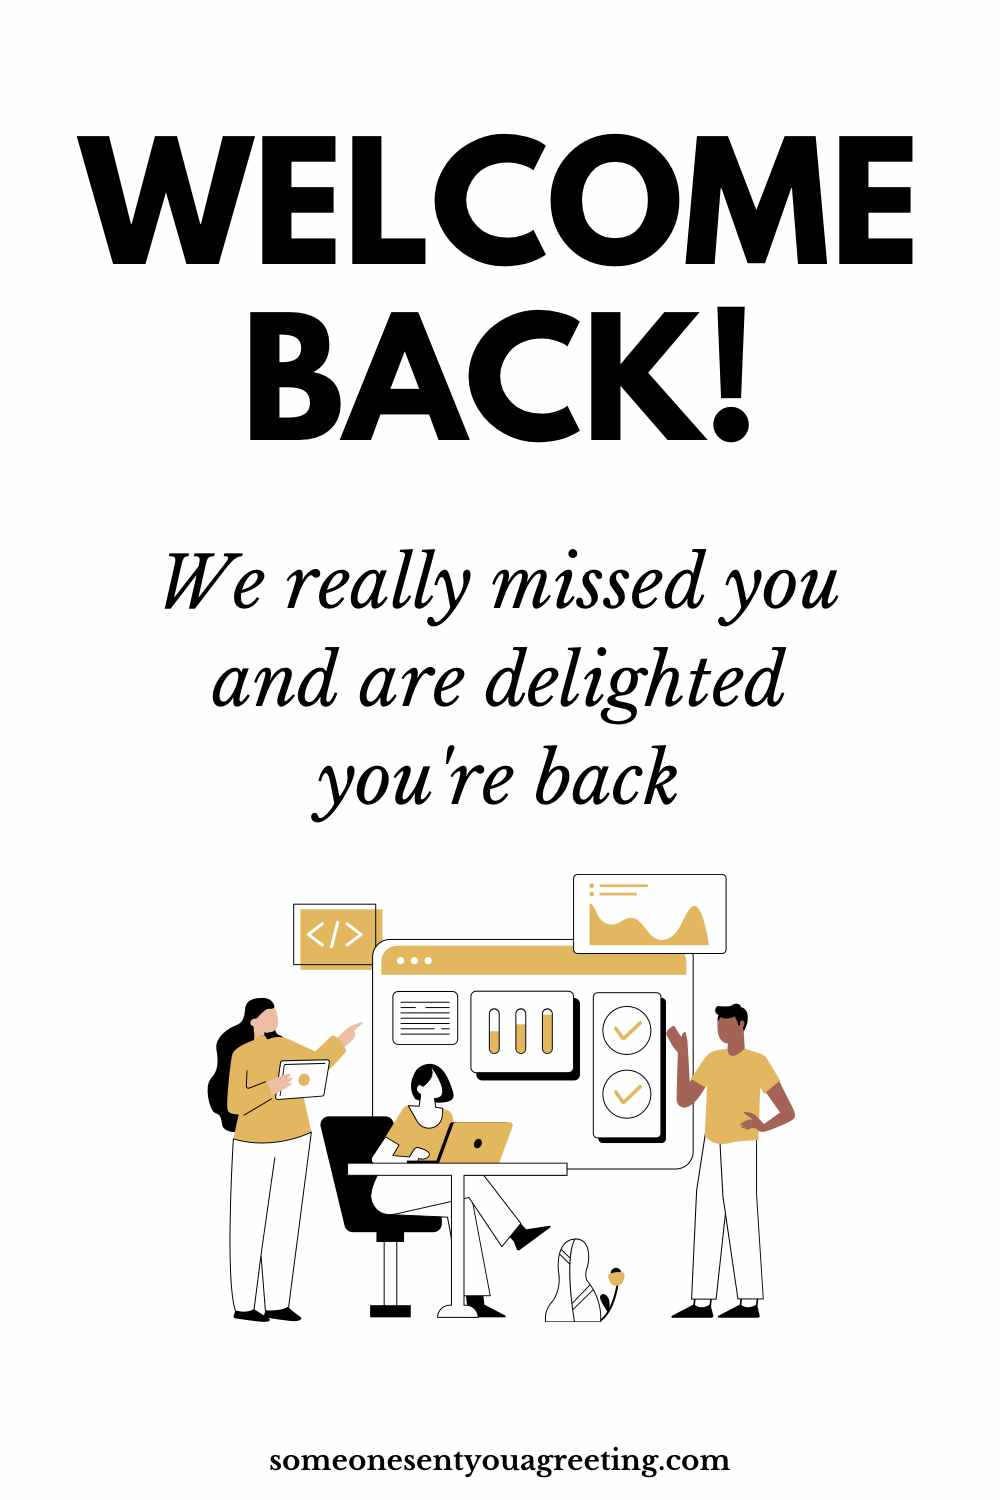 we missed you and are happy you are returning to work